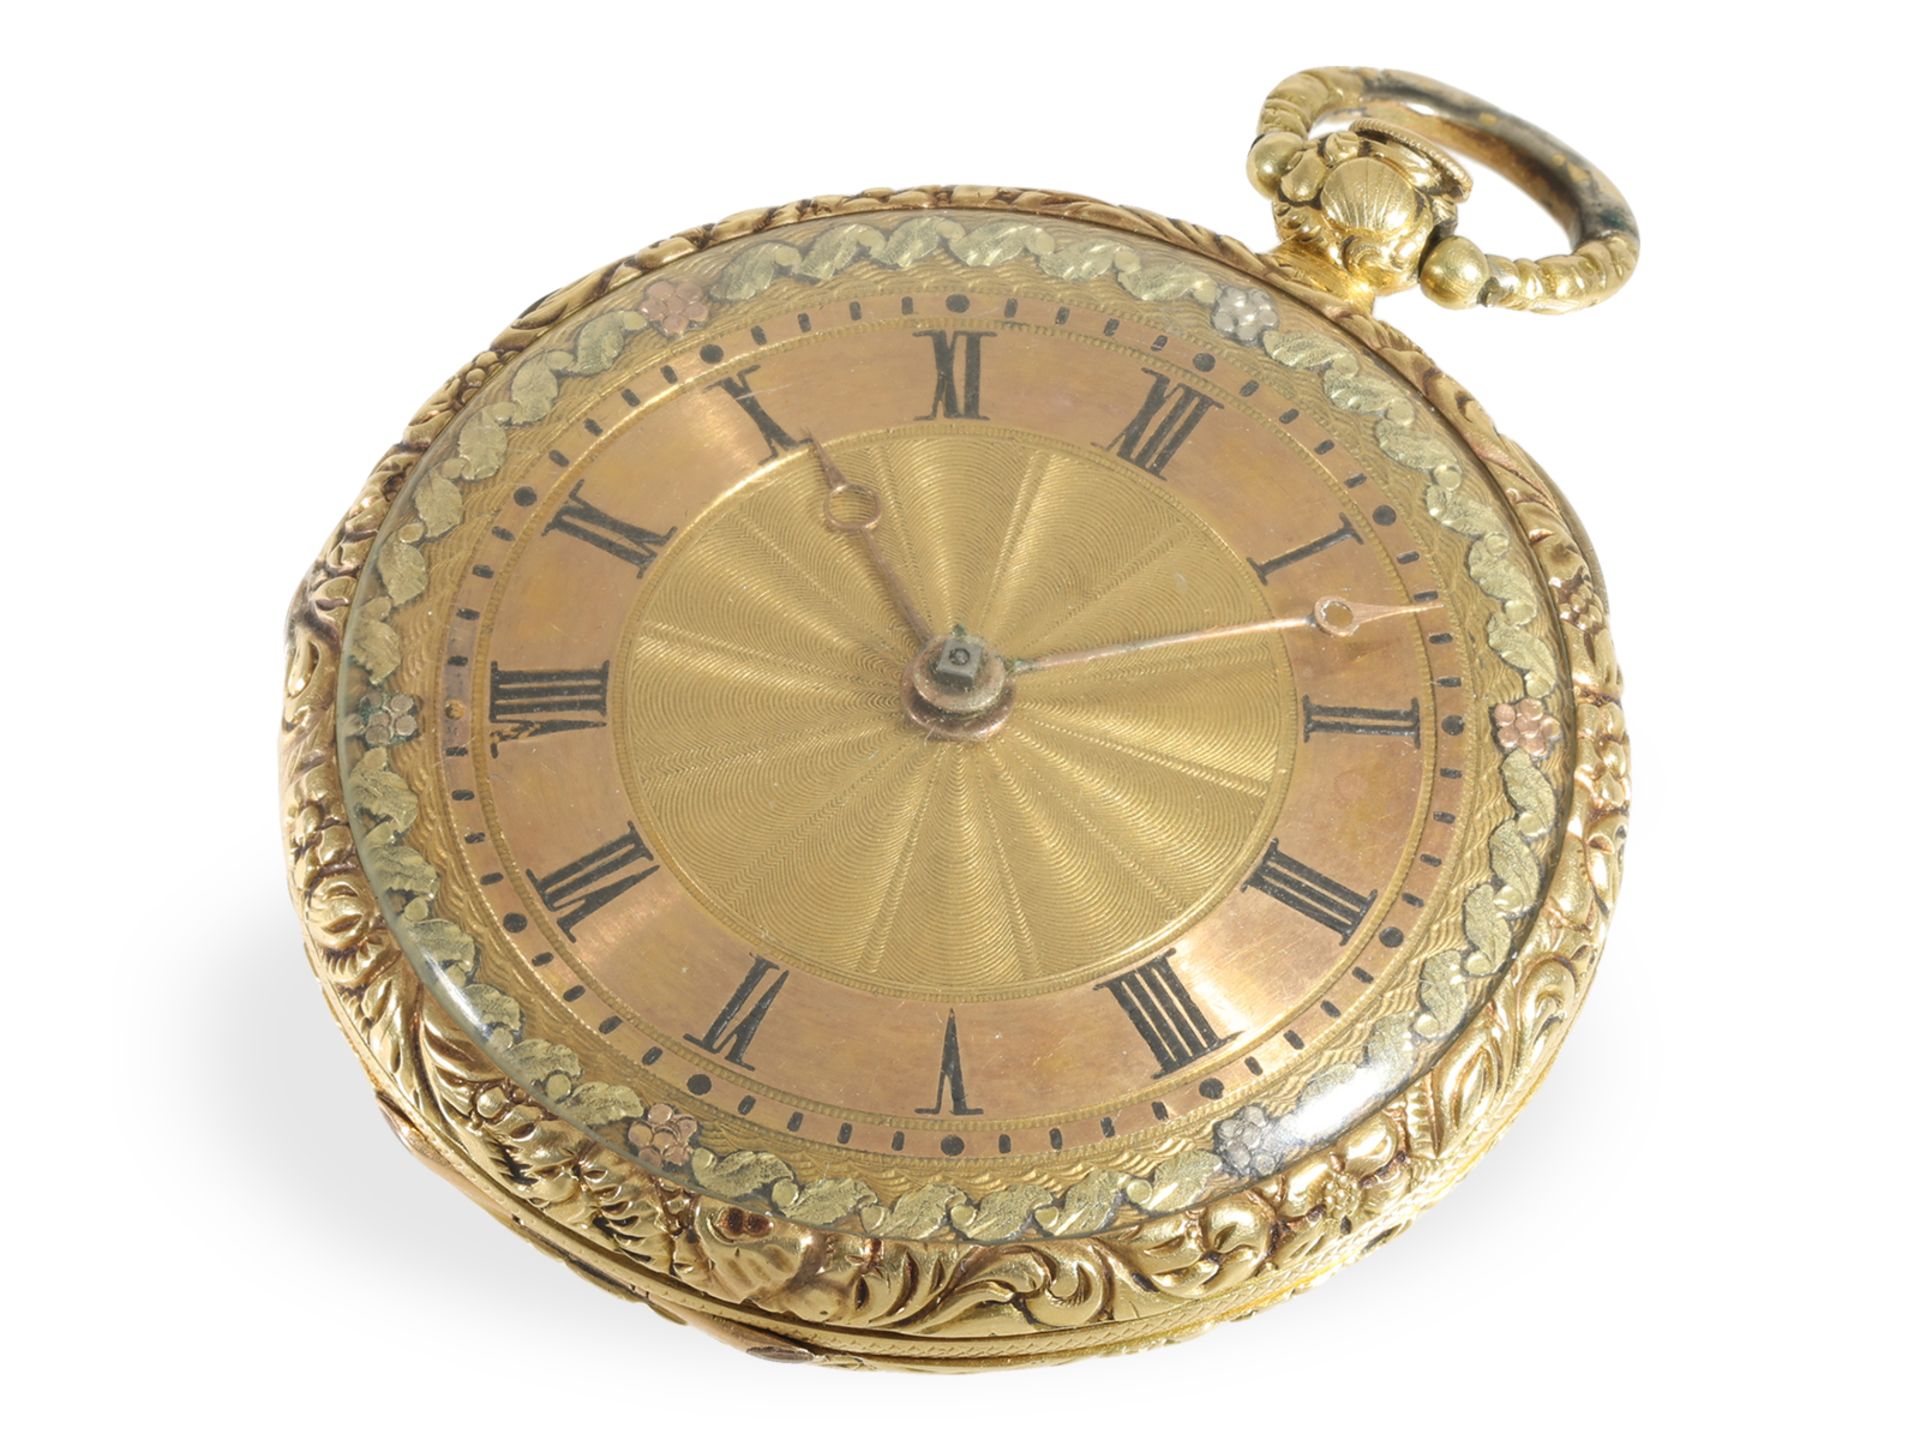 Pocket watch: gold verge watch from around 1830, owned by the Falinskys (manor) - Image 4 of 6